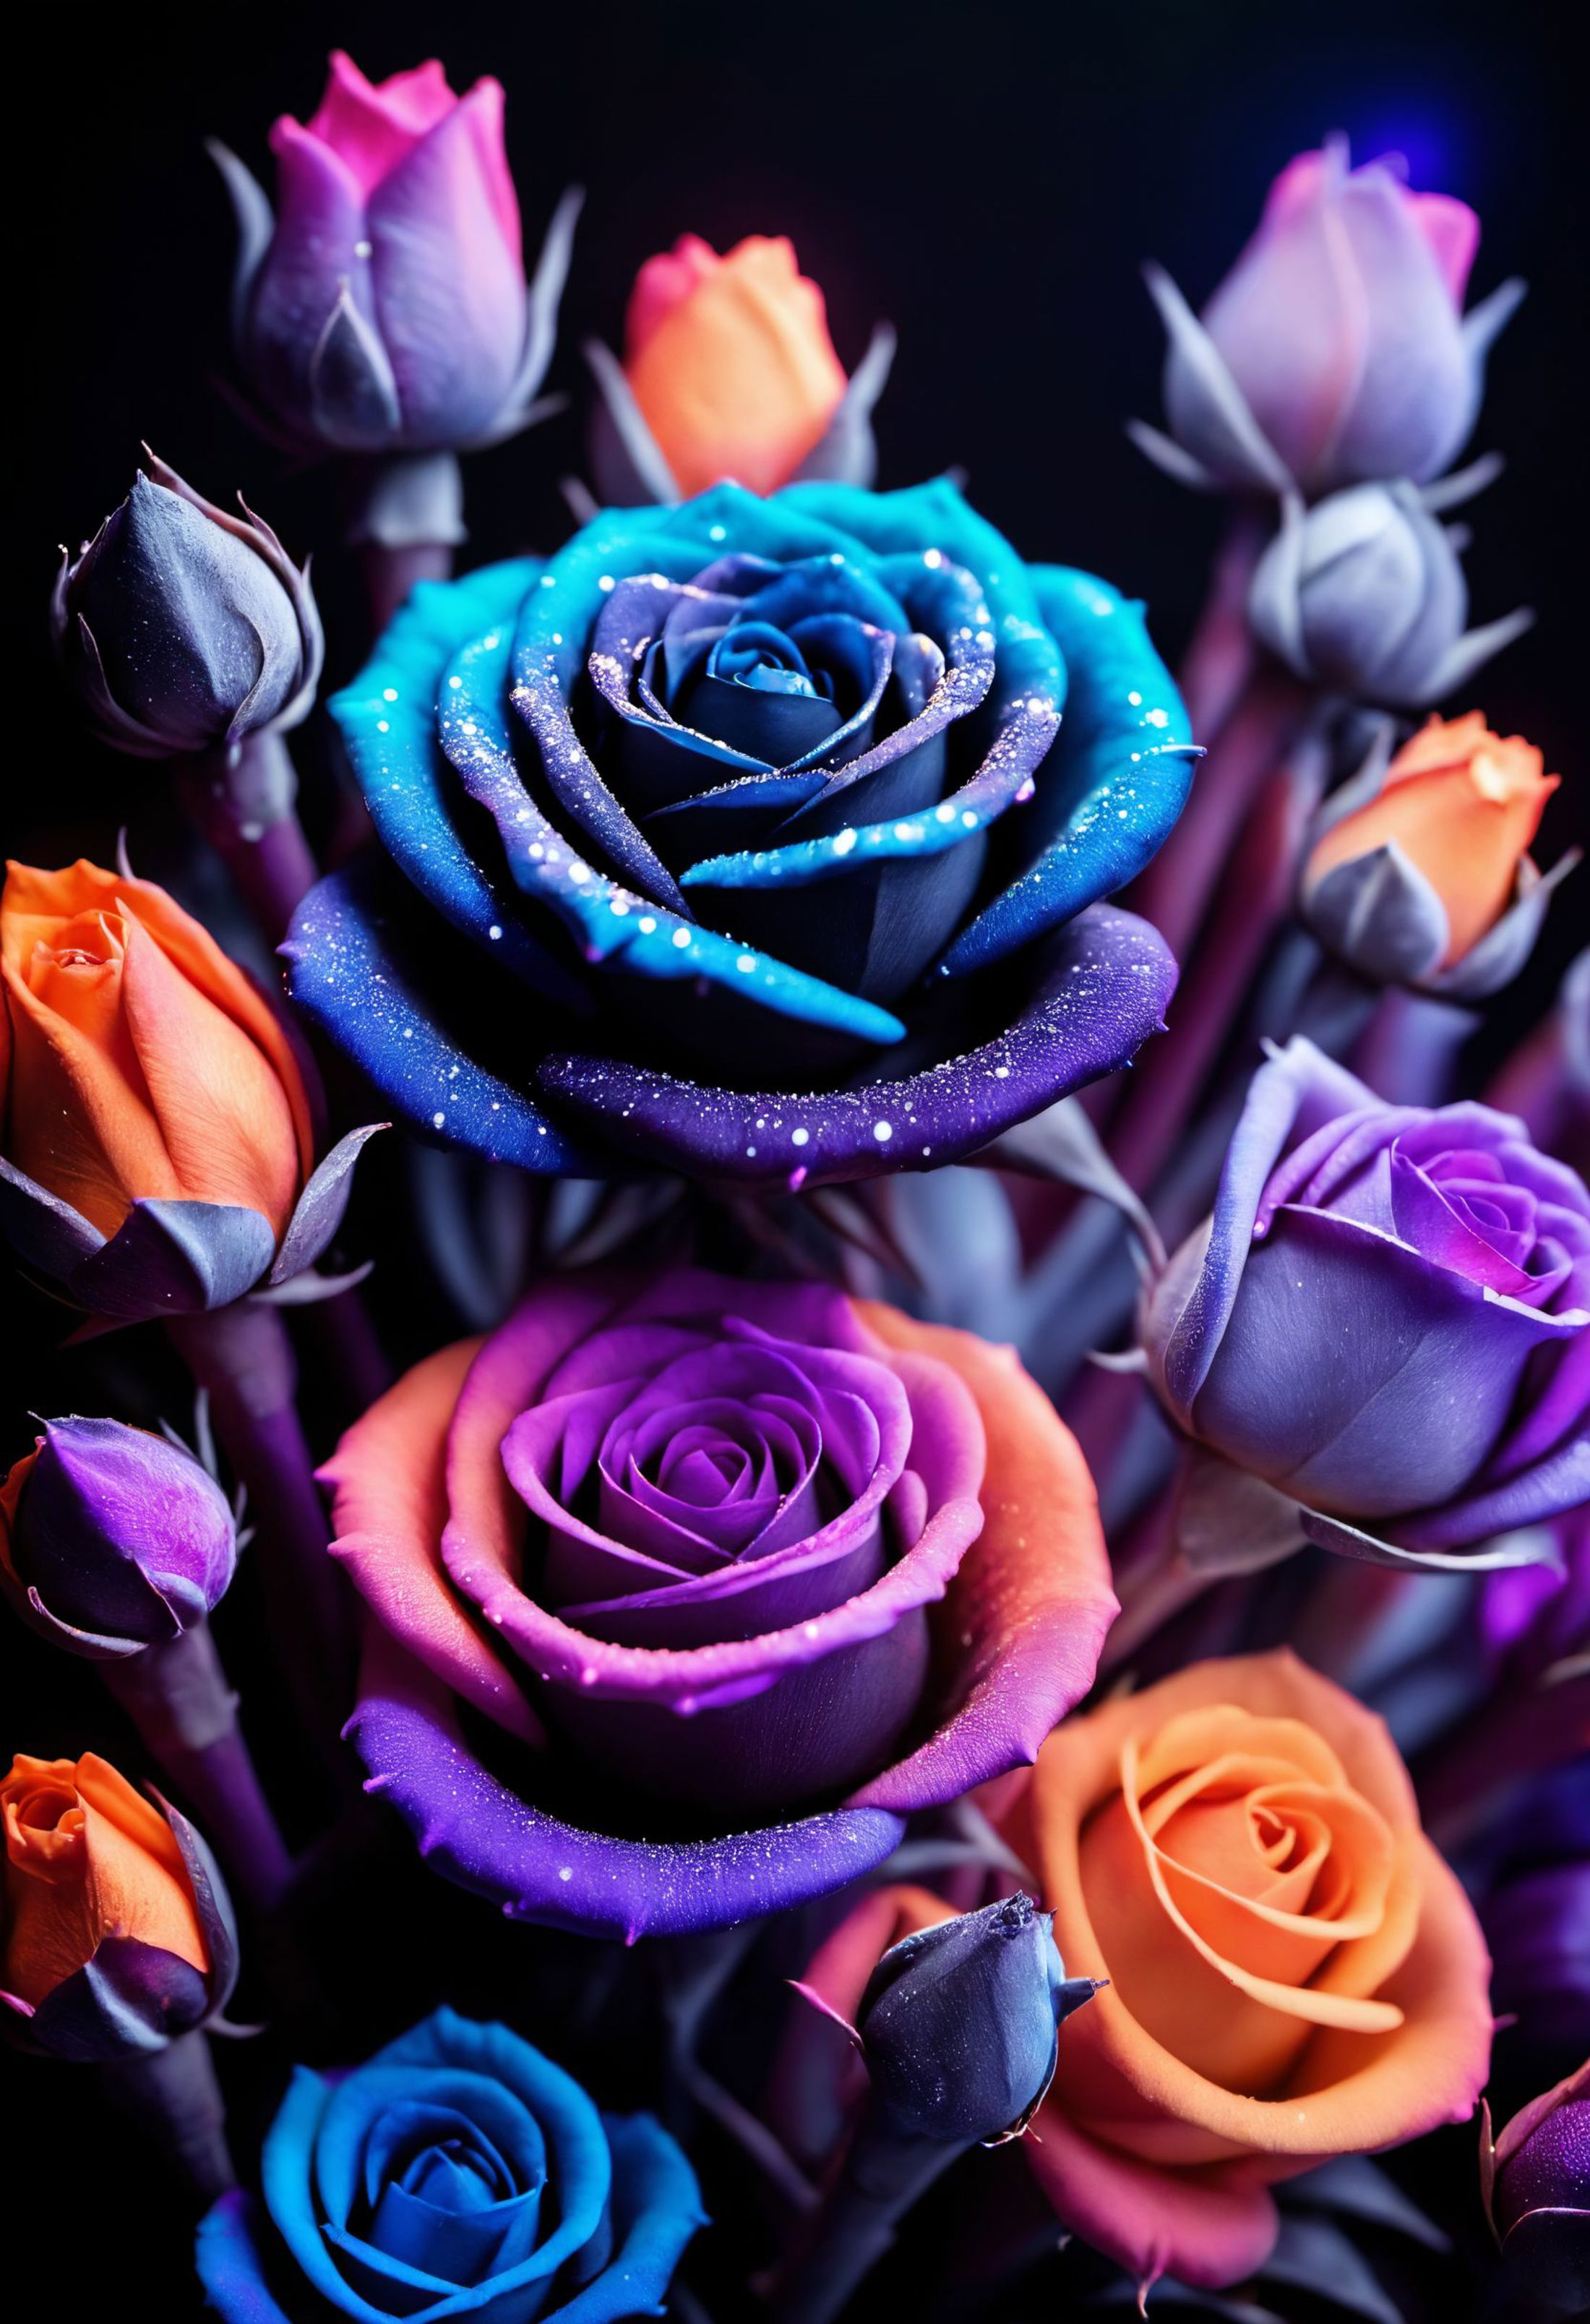 A bouquet of colorful roses with purple, orange, and blue flowers.